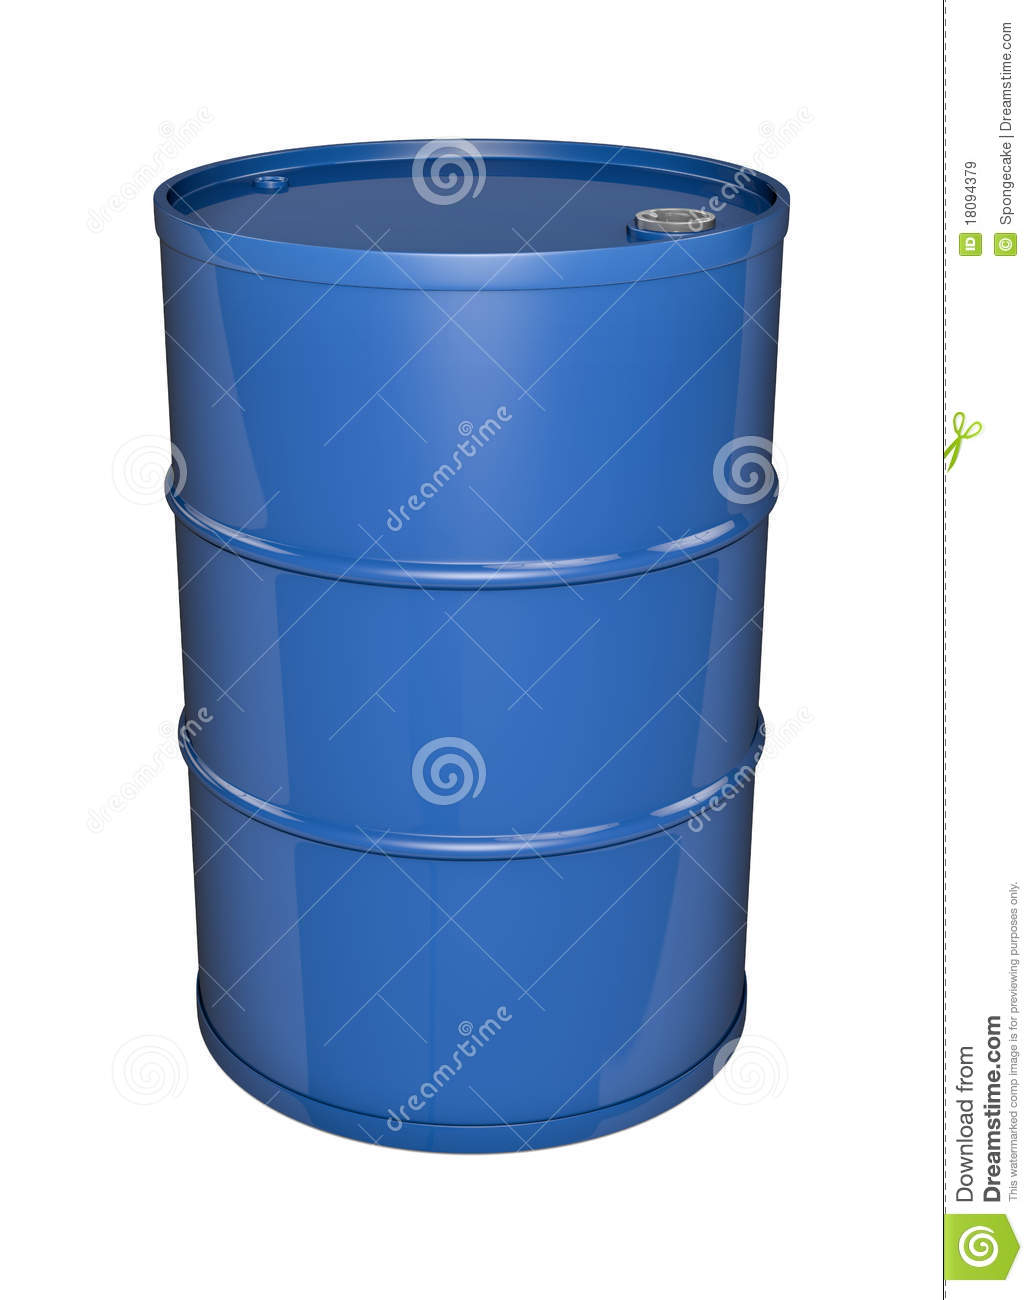 Blue Oil Drum Royalty Free Stock Images   Image  18094379